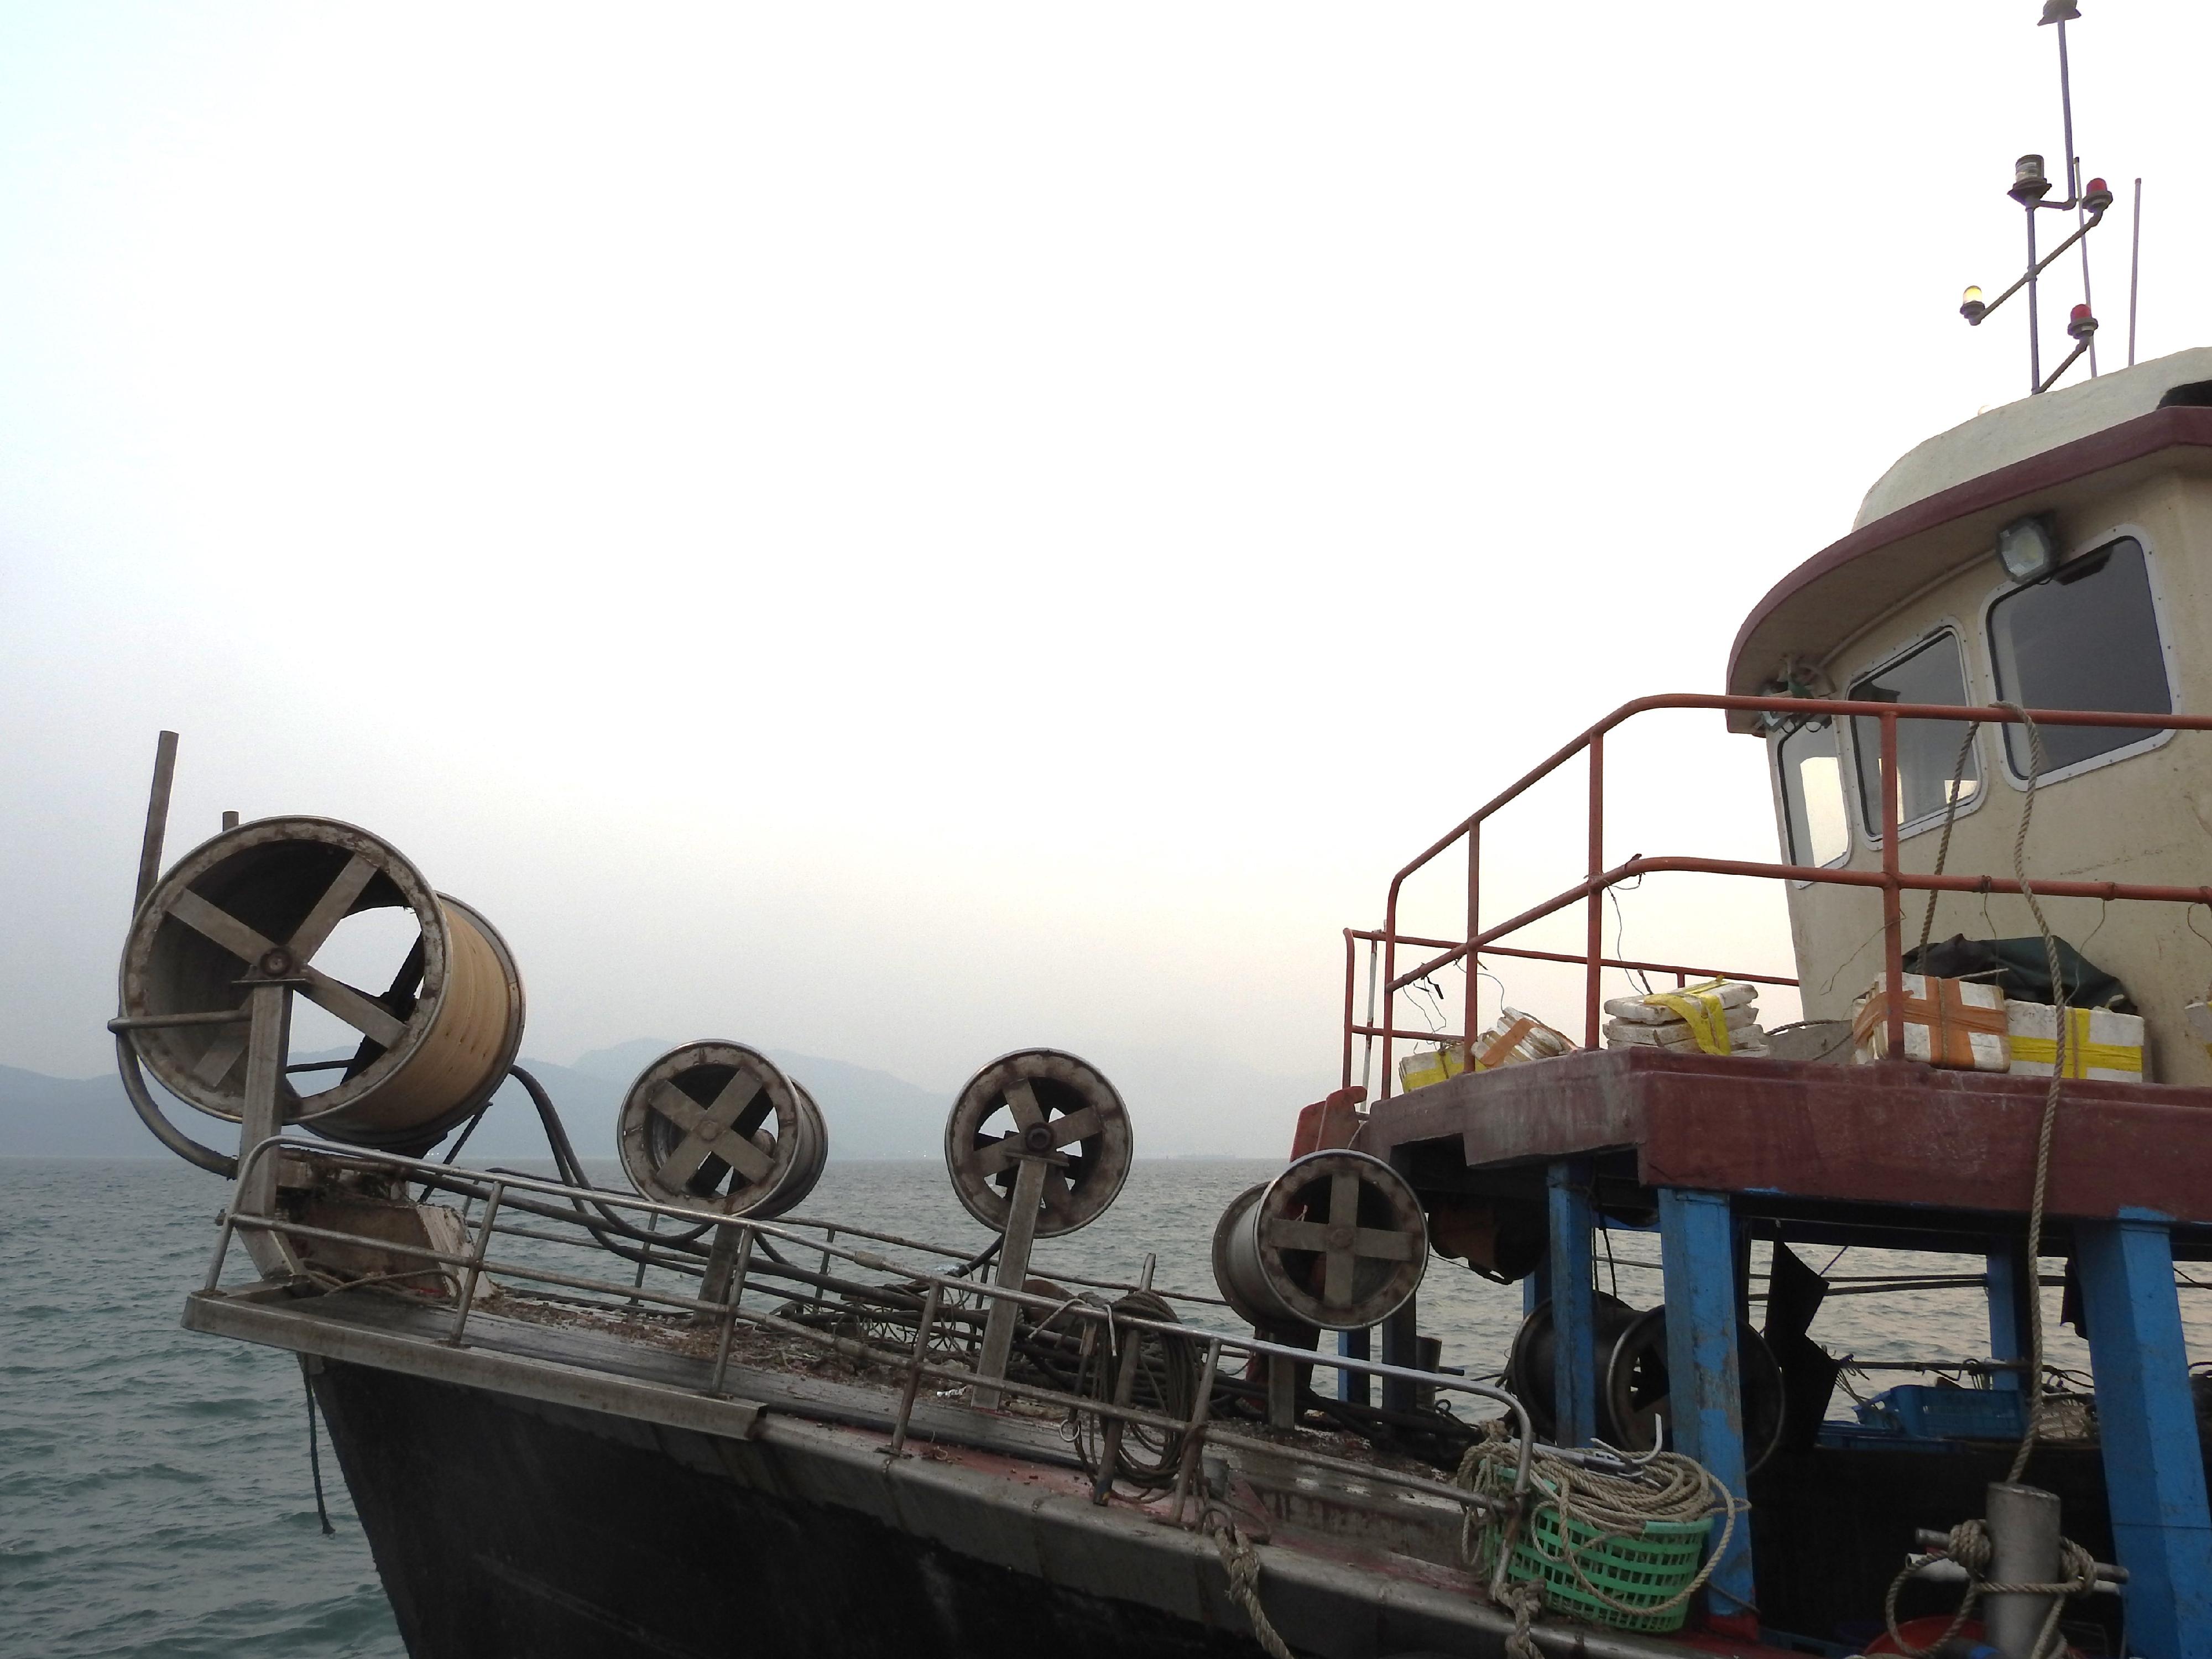 Four Mainland fisherman deckhands engaged in fishing using snake cages (a type of cage trap banned in Hong Kong waters) earlier in waters off the River Trade Terminal in western Hong Kong, and a local coxswain on board were charged for breaching the Fisheries Protection Ordinance (Cap. 171) and convicted today (March 8). Photo shows the seized winches.